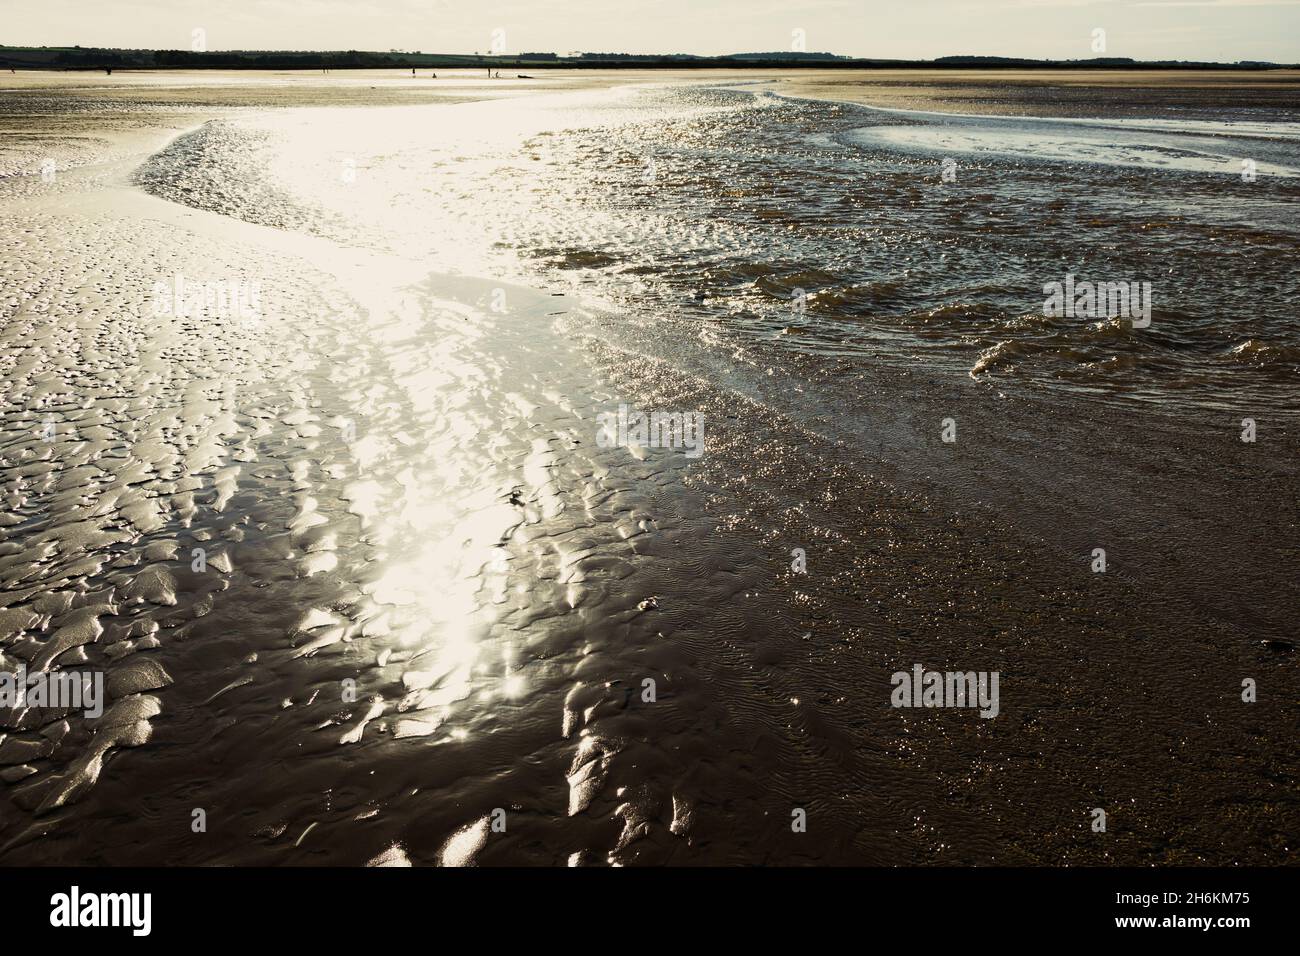 Sun shining and shimmering on the wet sand at Brancaster beach North Norfolk England Stock Photo